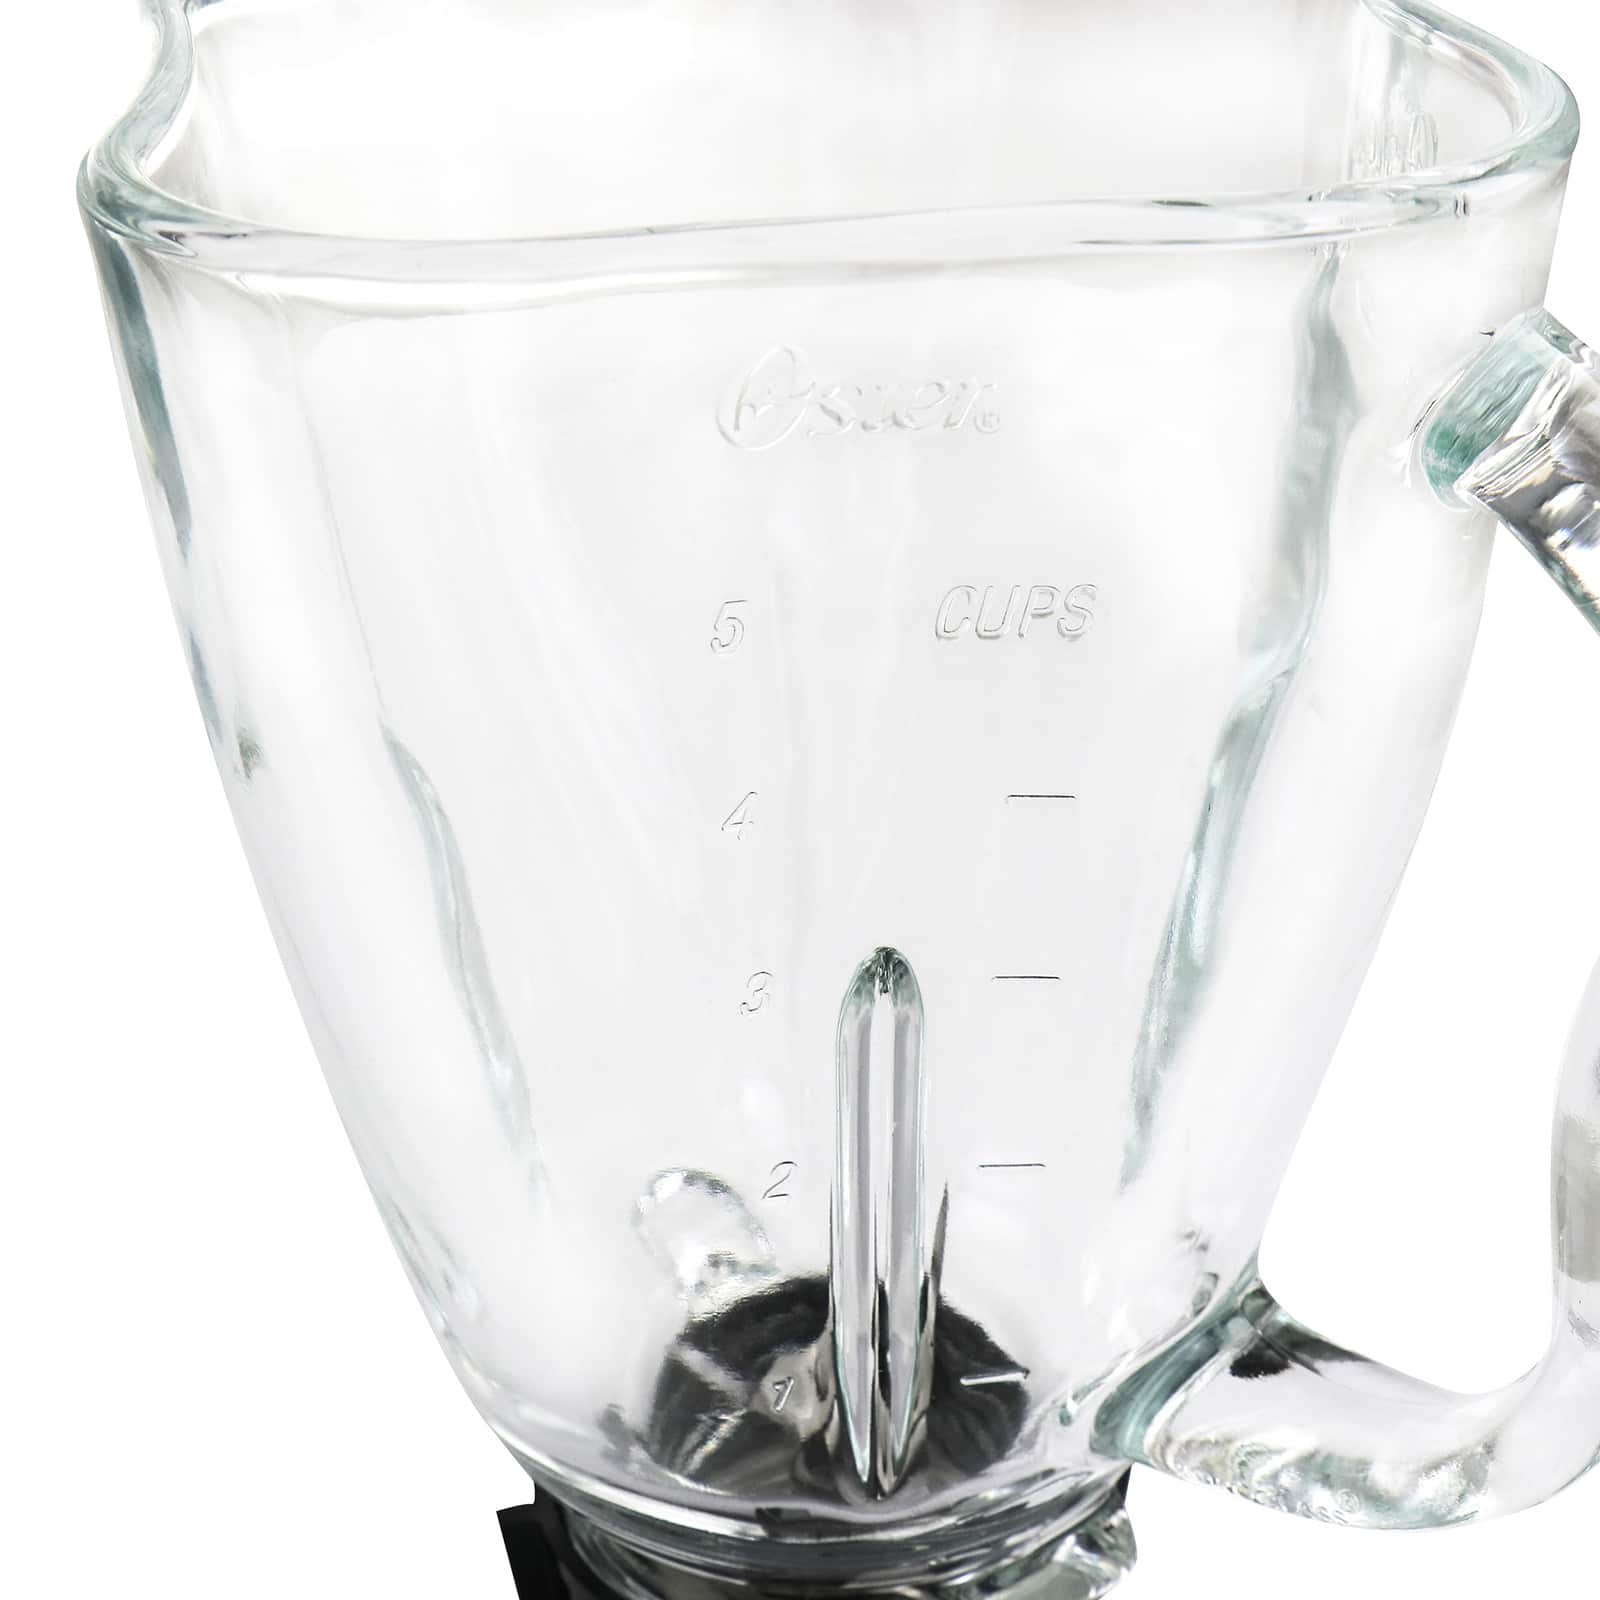 Best Buy: 5-Cup Replacement Glass Jar for Most Oster Blenders